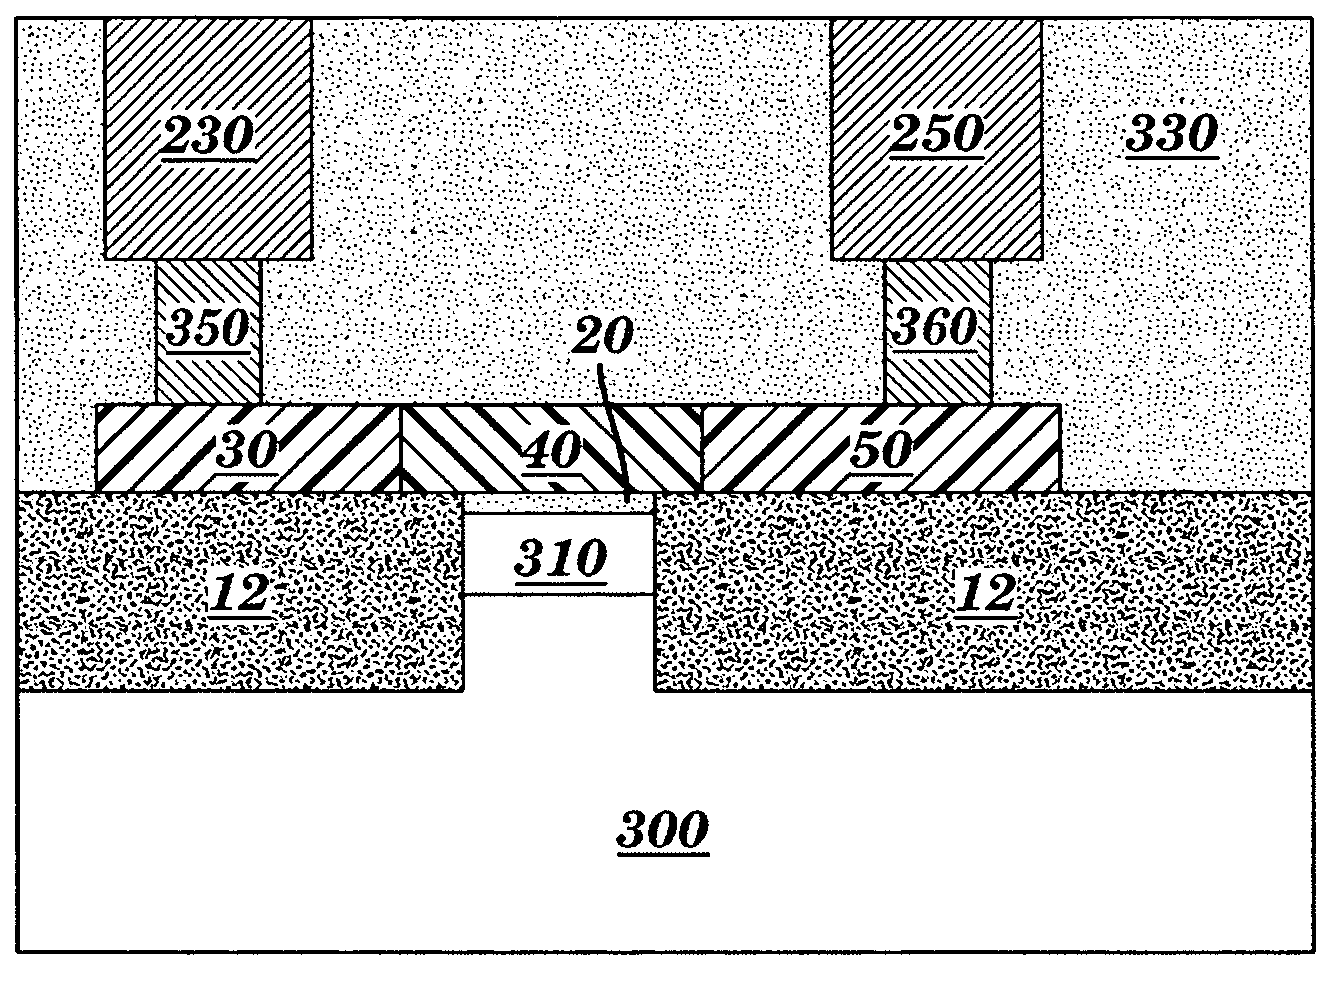 Antifuse structure having an integrated heating element